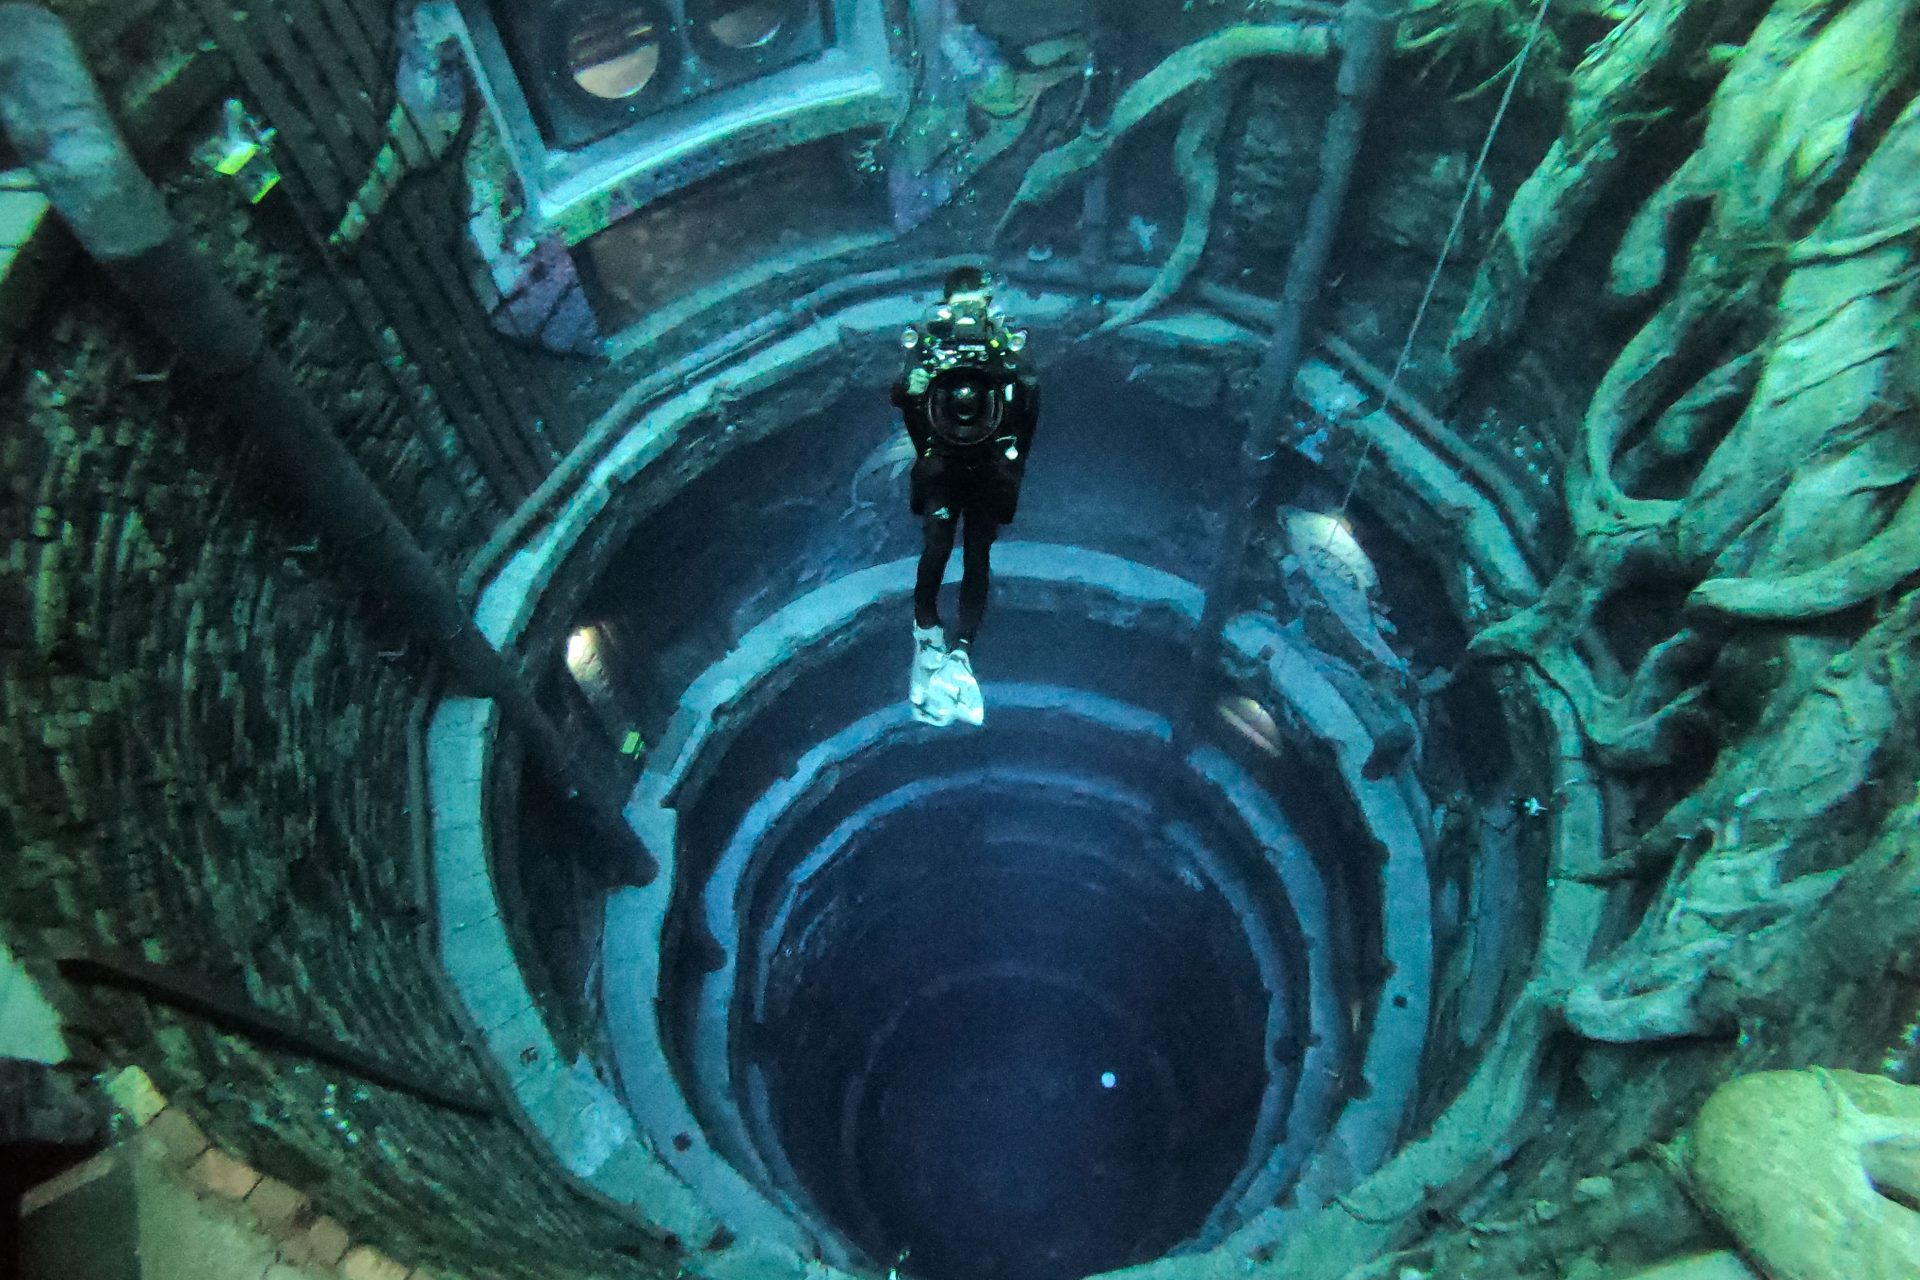 A spectacular plunge into the world's deepest swimming pool!